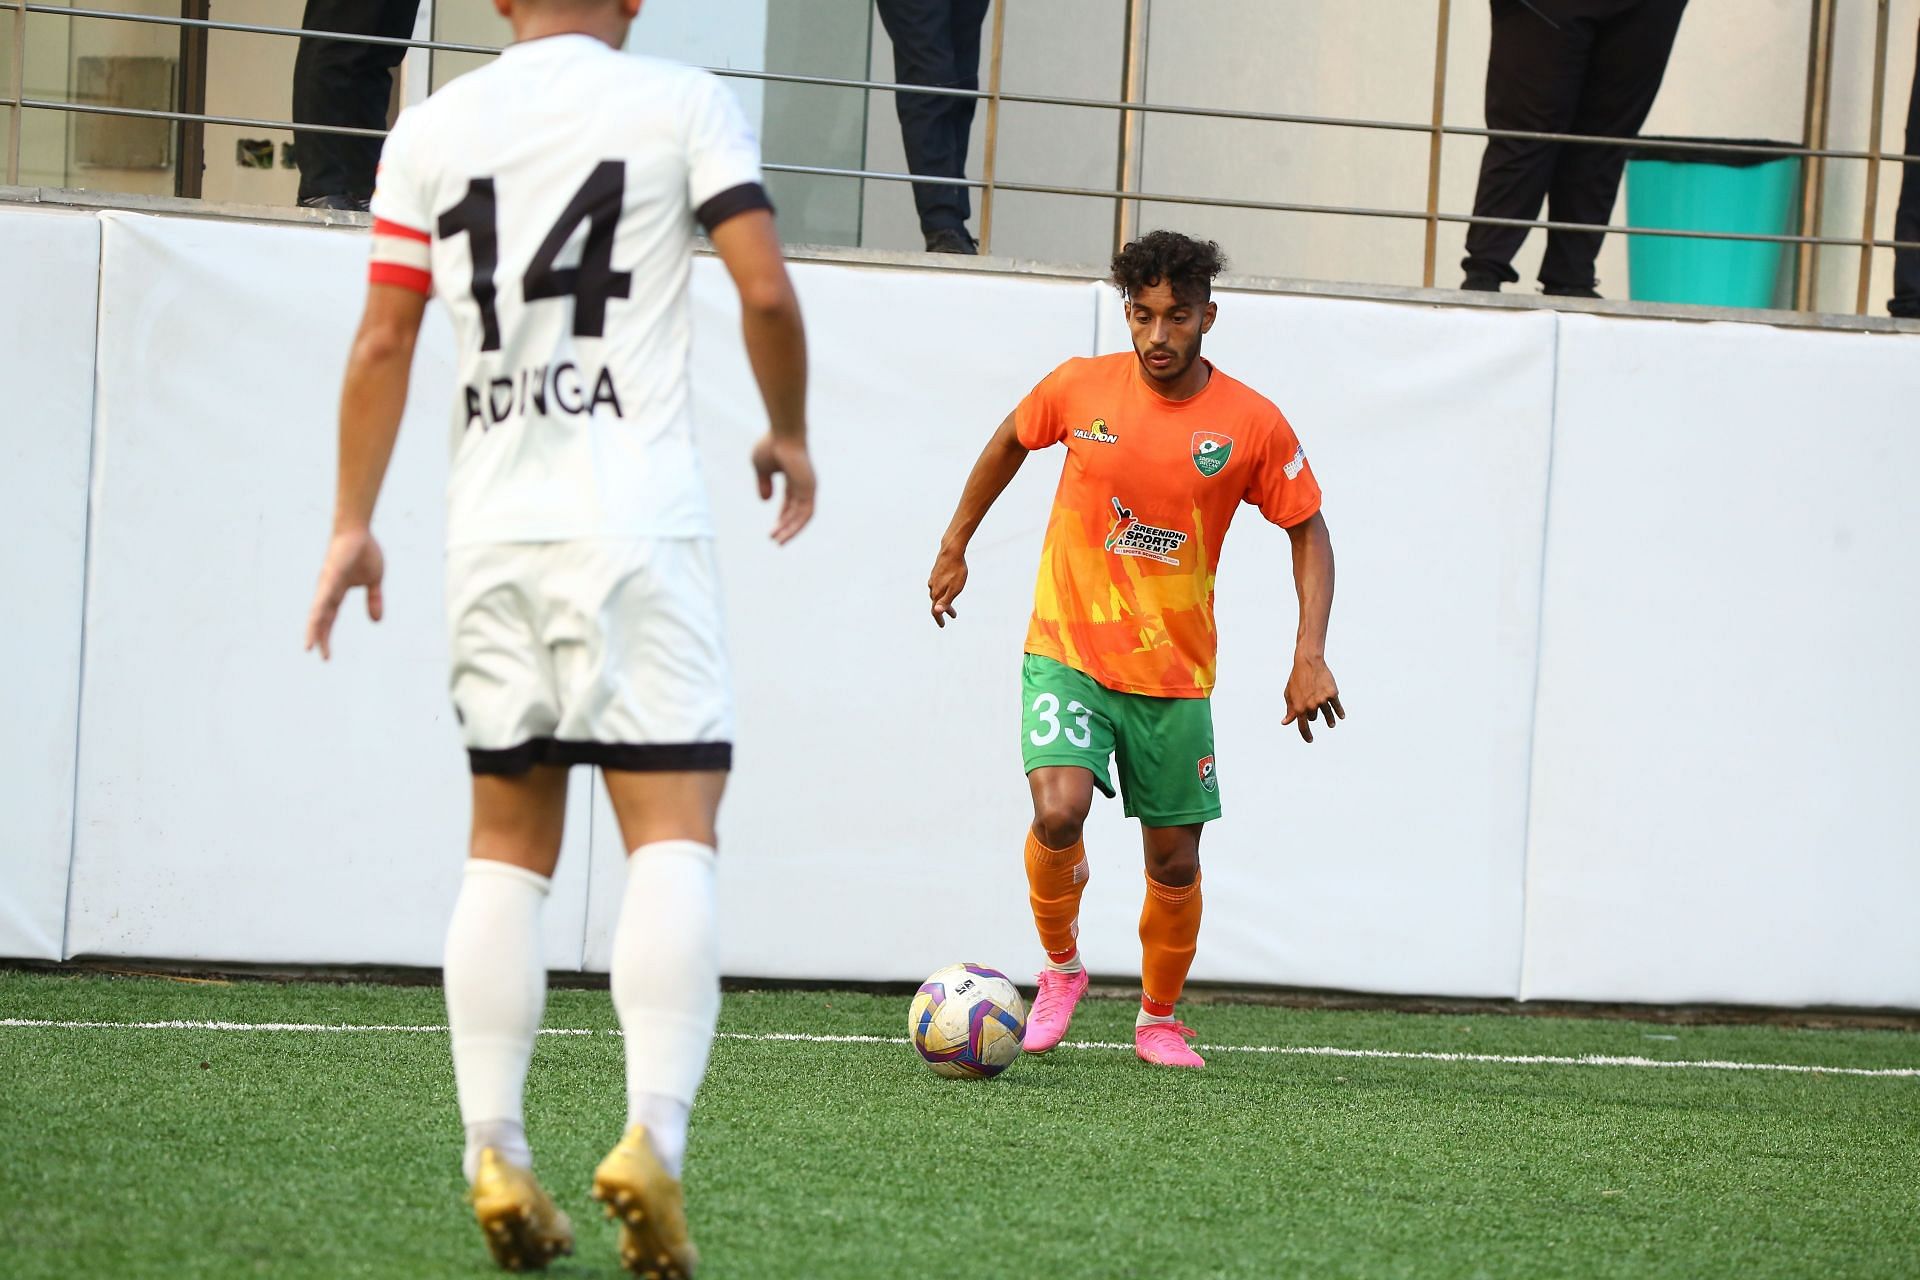 Jagdeep was seen both attacking and defending well on Thursday.